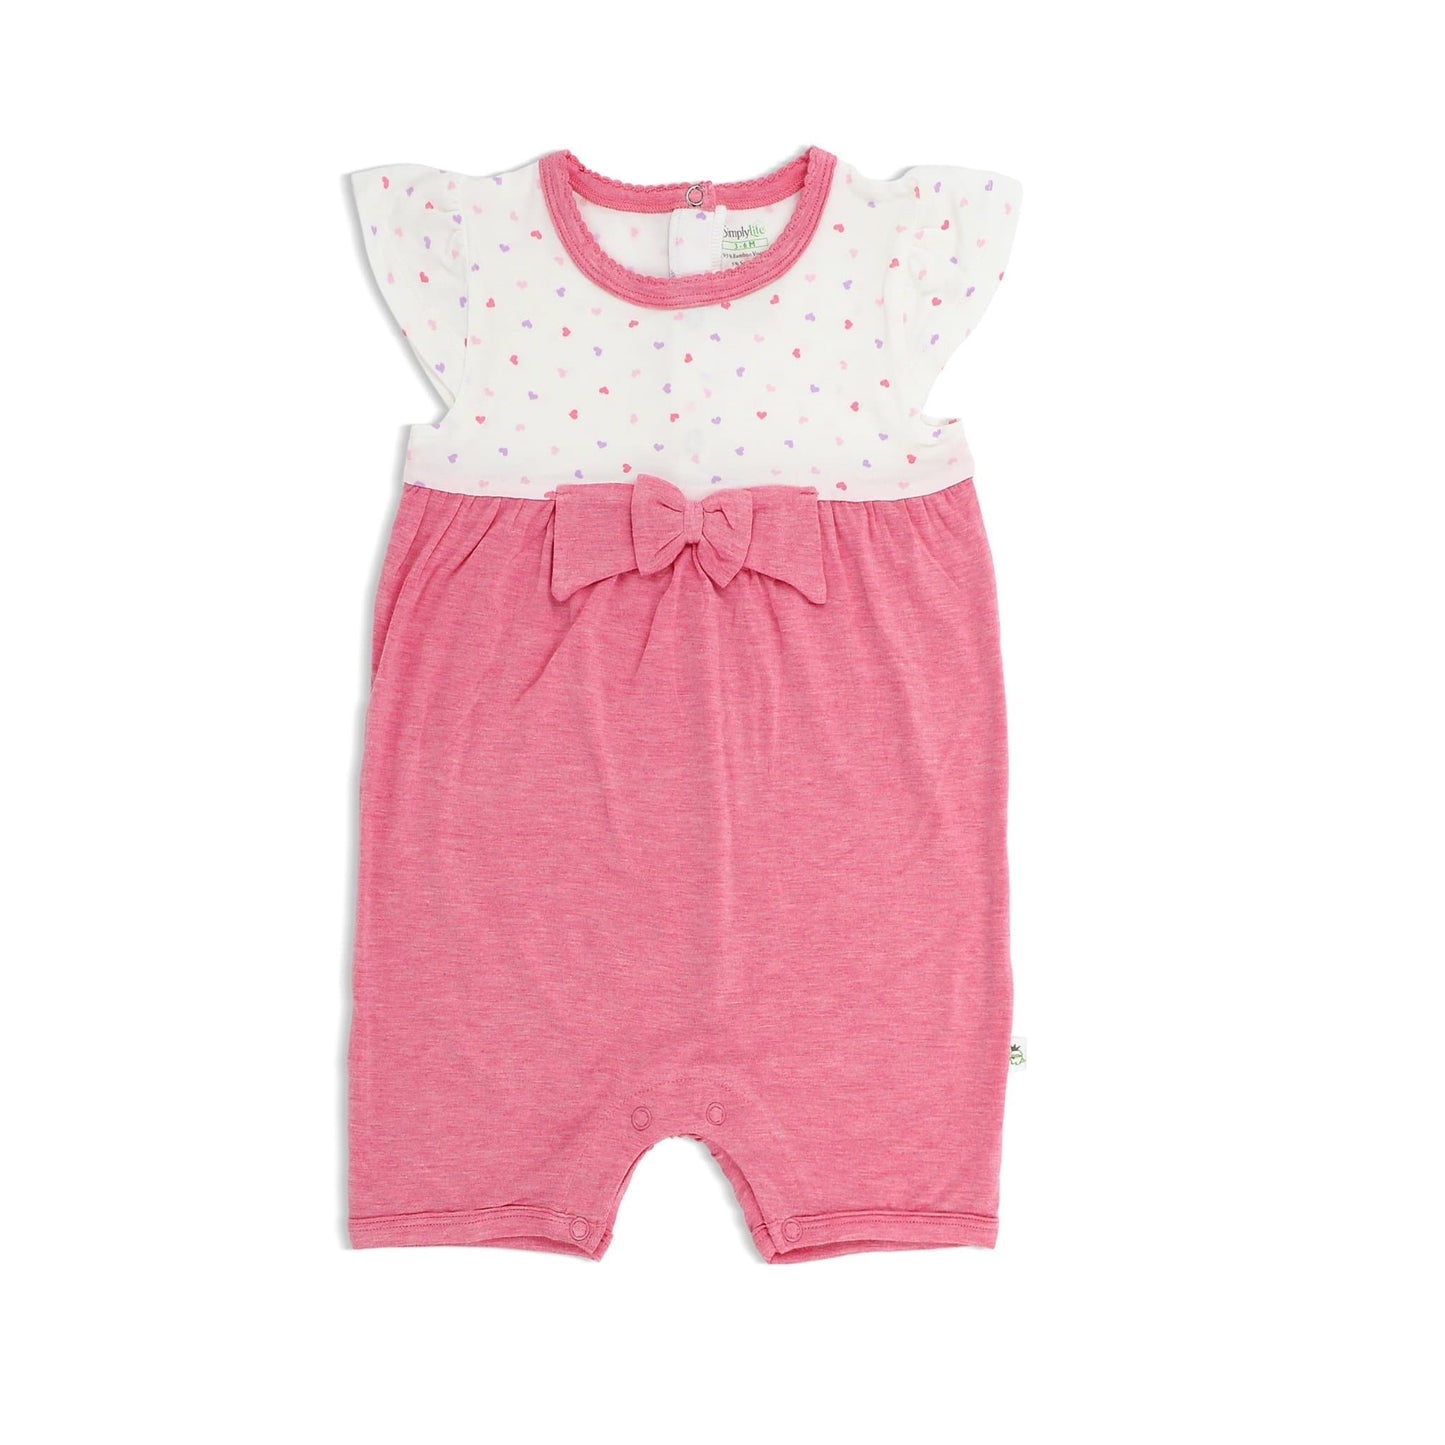 Hearts - Shortall cap-sleeved with bow & puffed trims at neckline - Simply Life